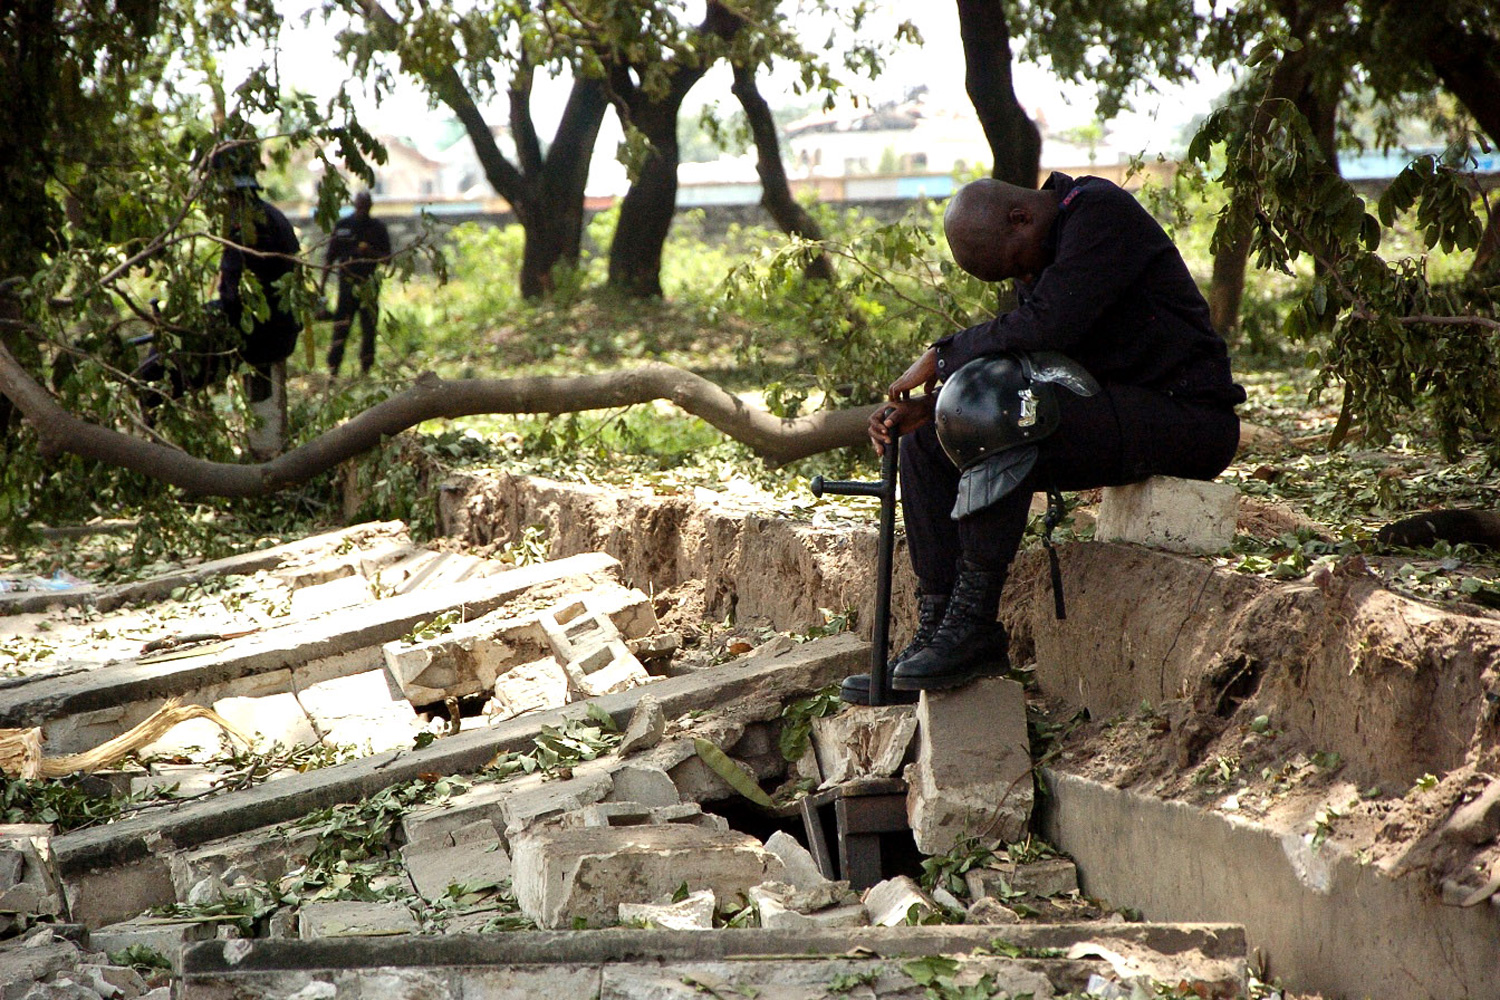 March 5, 2012. A policeman rests in the shade amongst destroyed buildings in the Mpila district of Brazzaville, Congo, following an explosion.